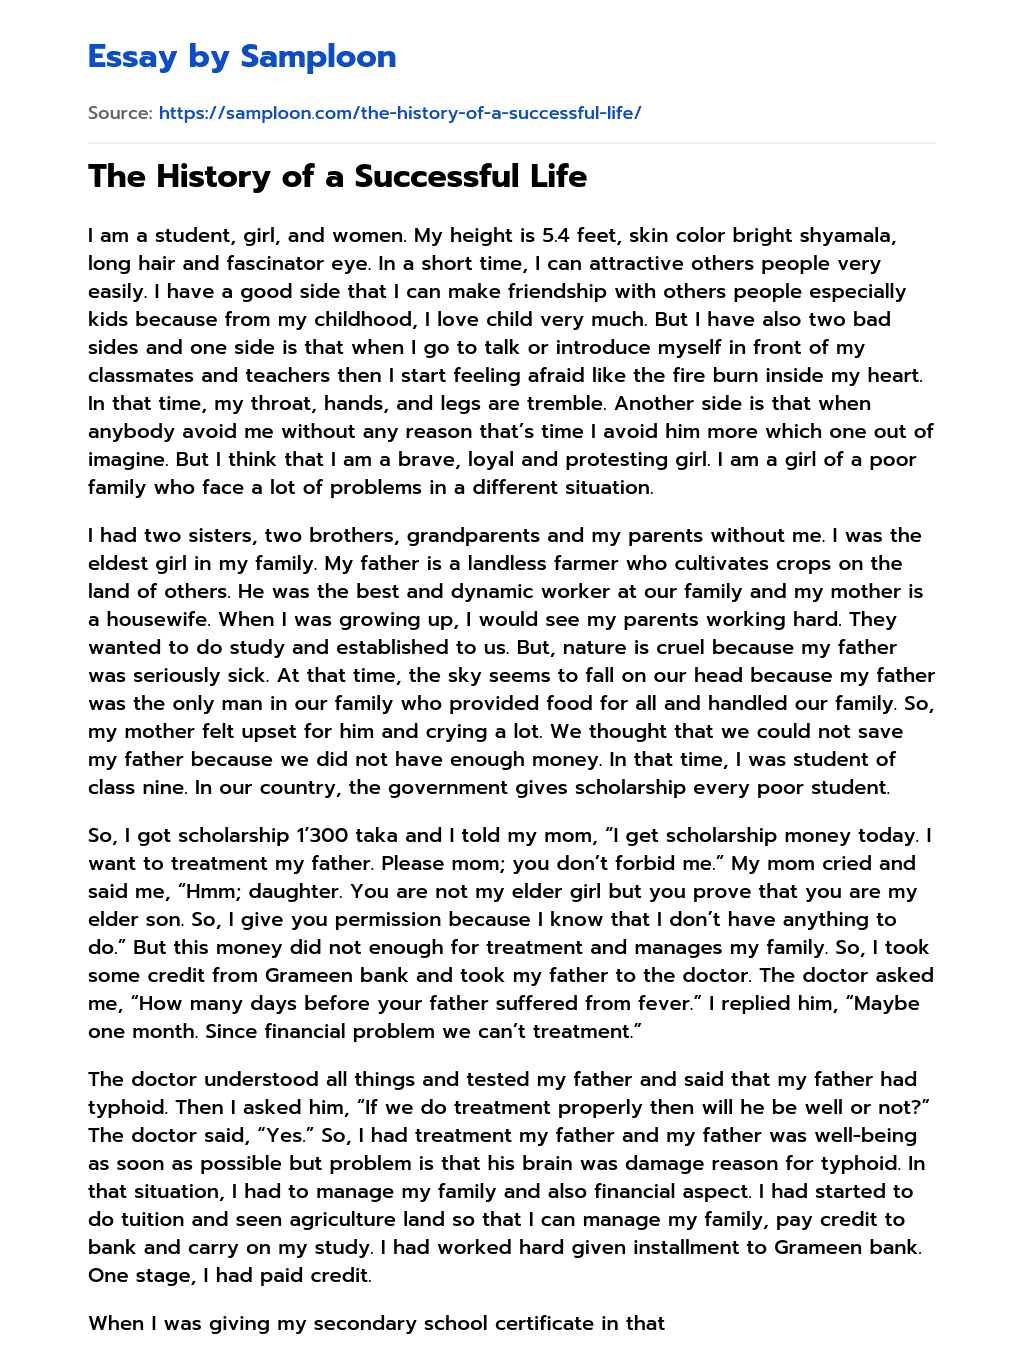 The History of a Successful Life essay